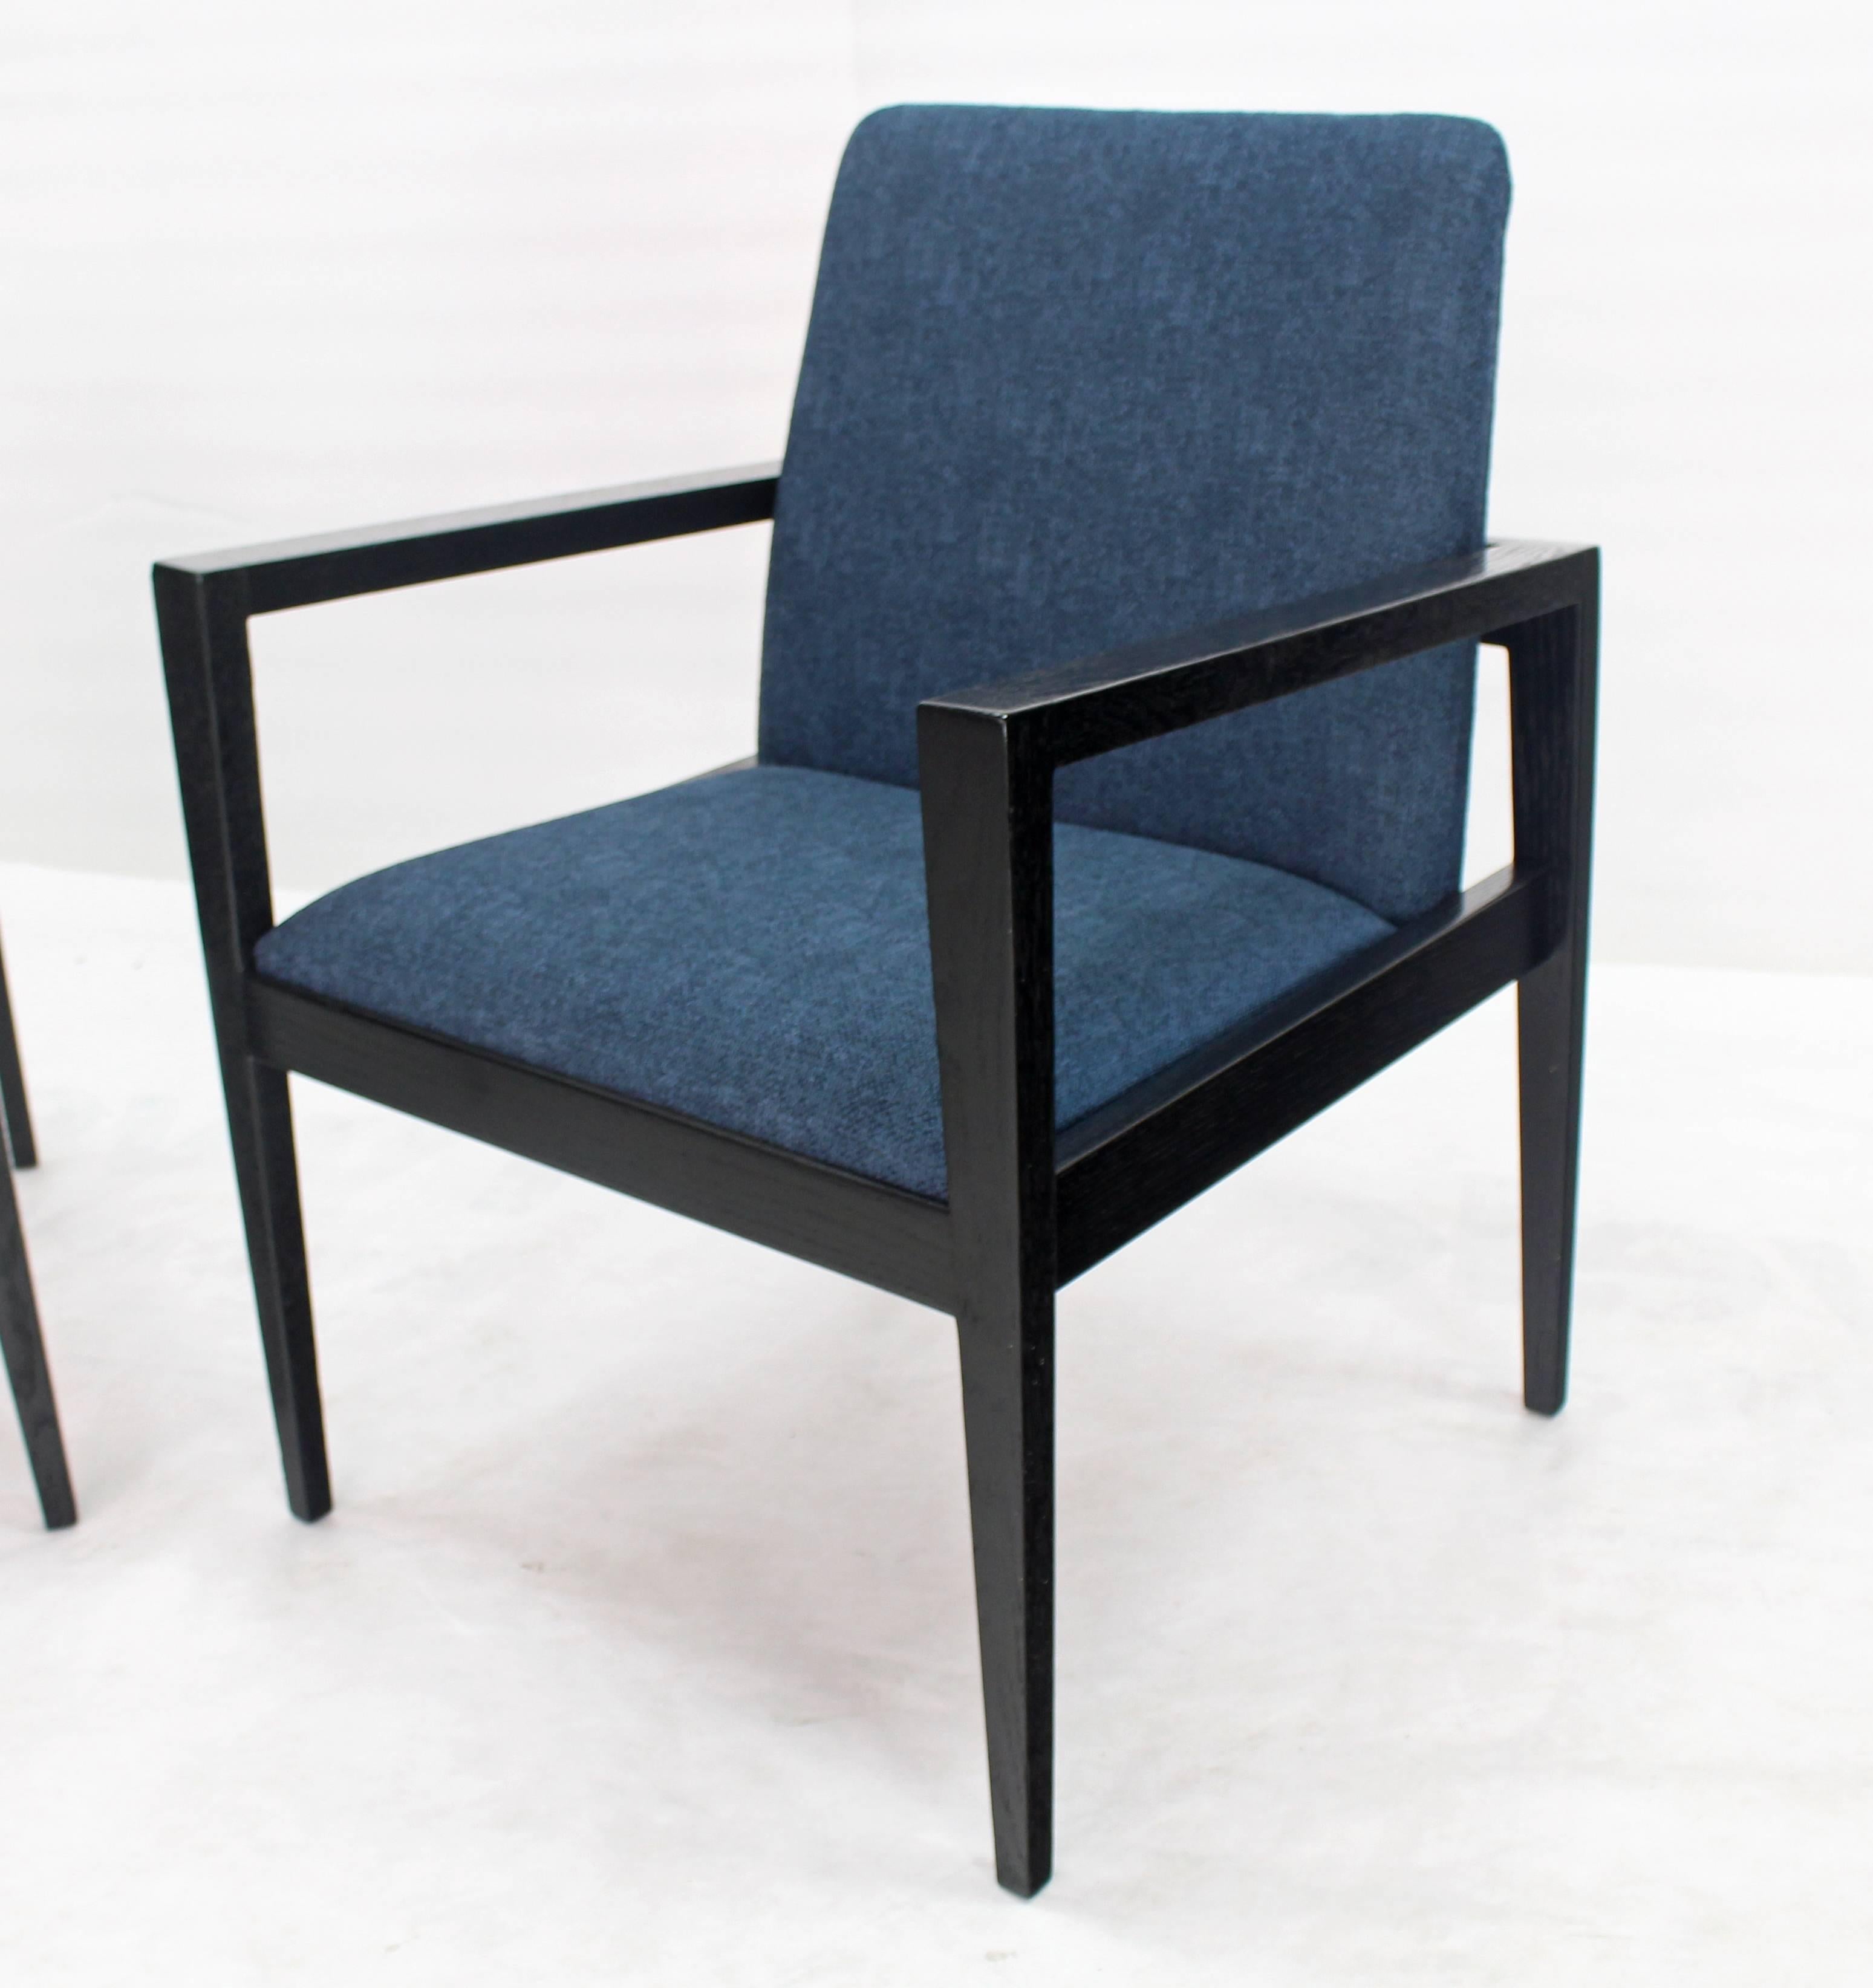 Pair of black lacquer framed new blue upholstery fabric lounge chairs. Nice tapered legs.